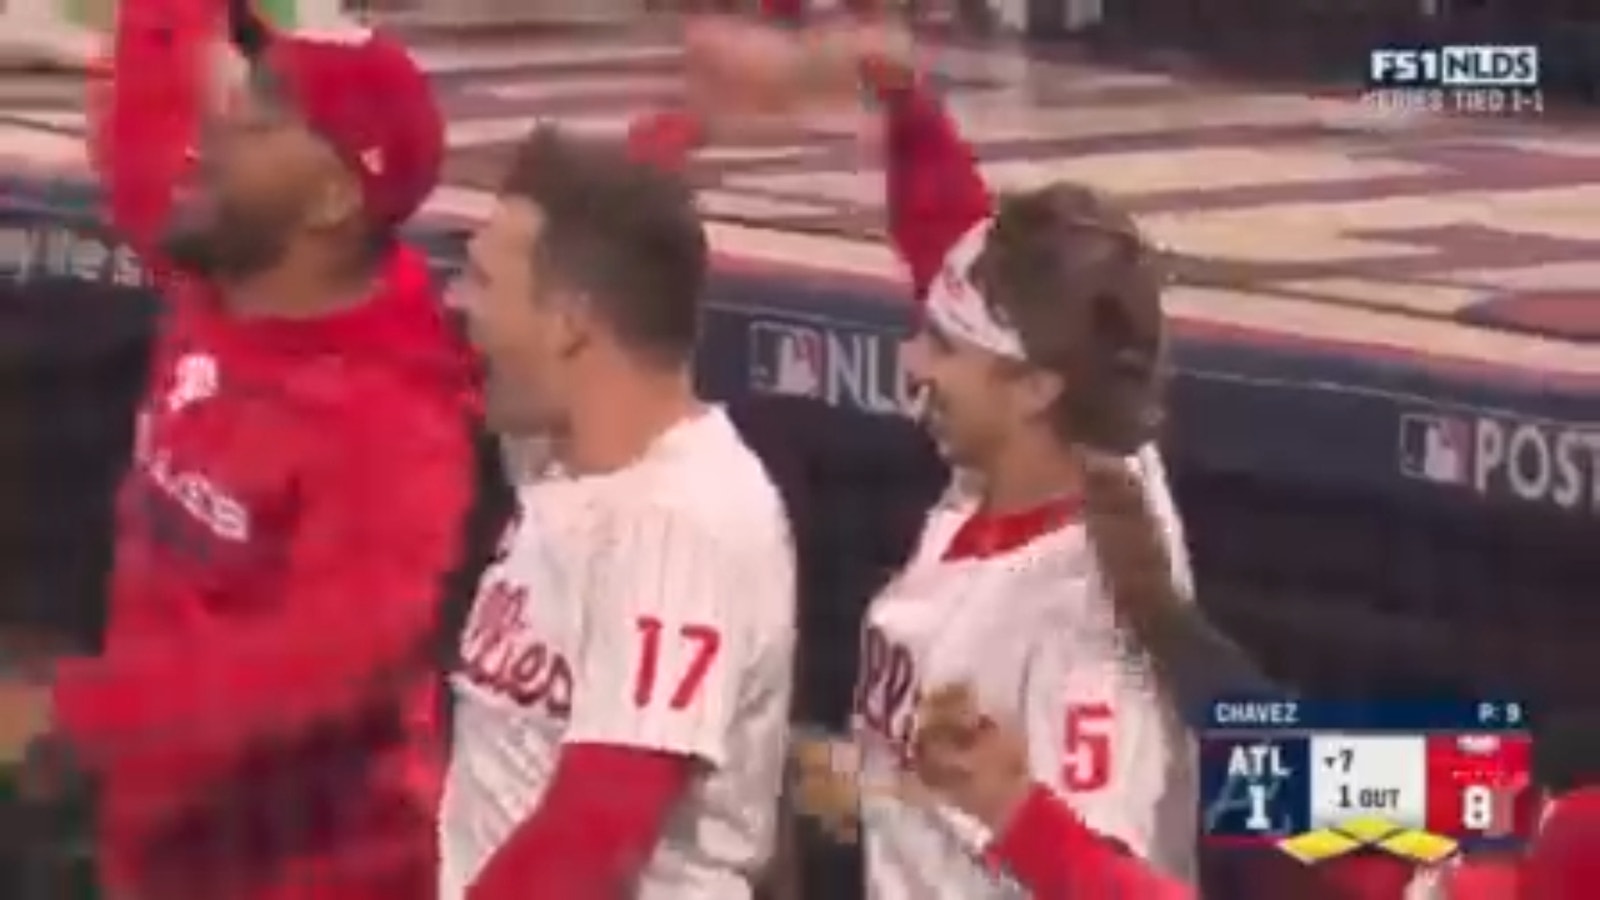 Phillies take a 9-1 lead after Bryce Harper's RBI